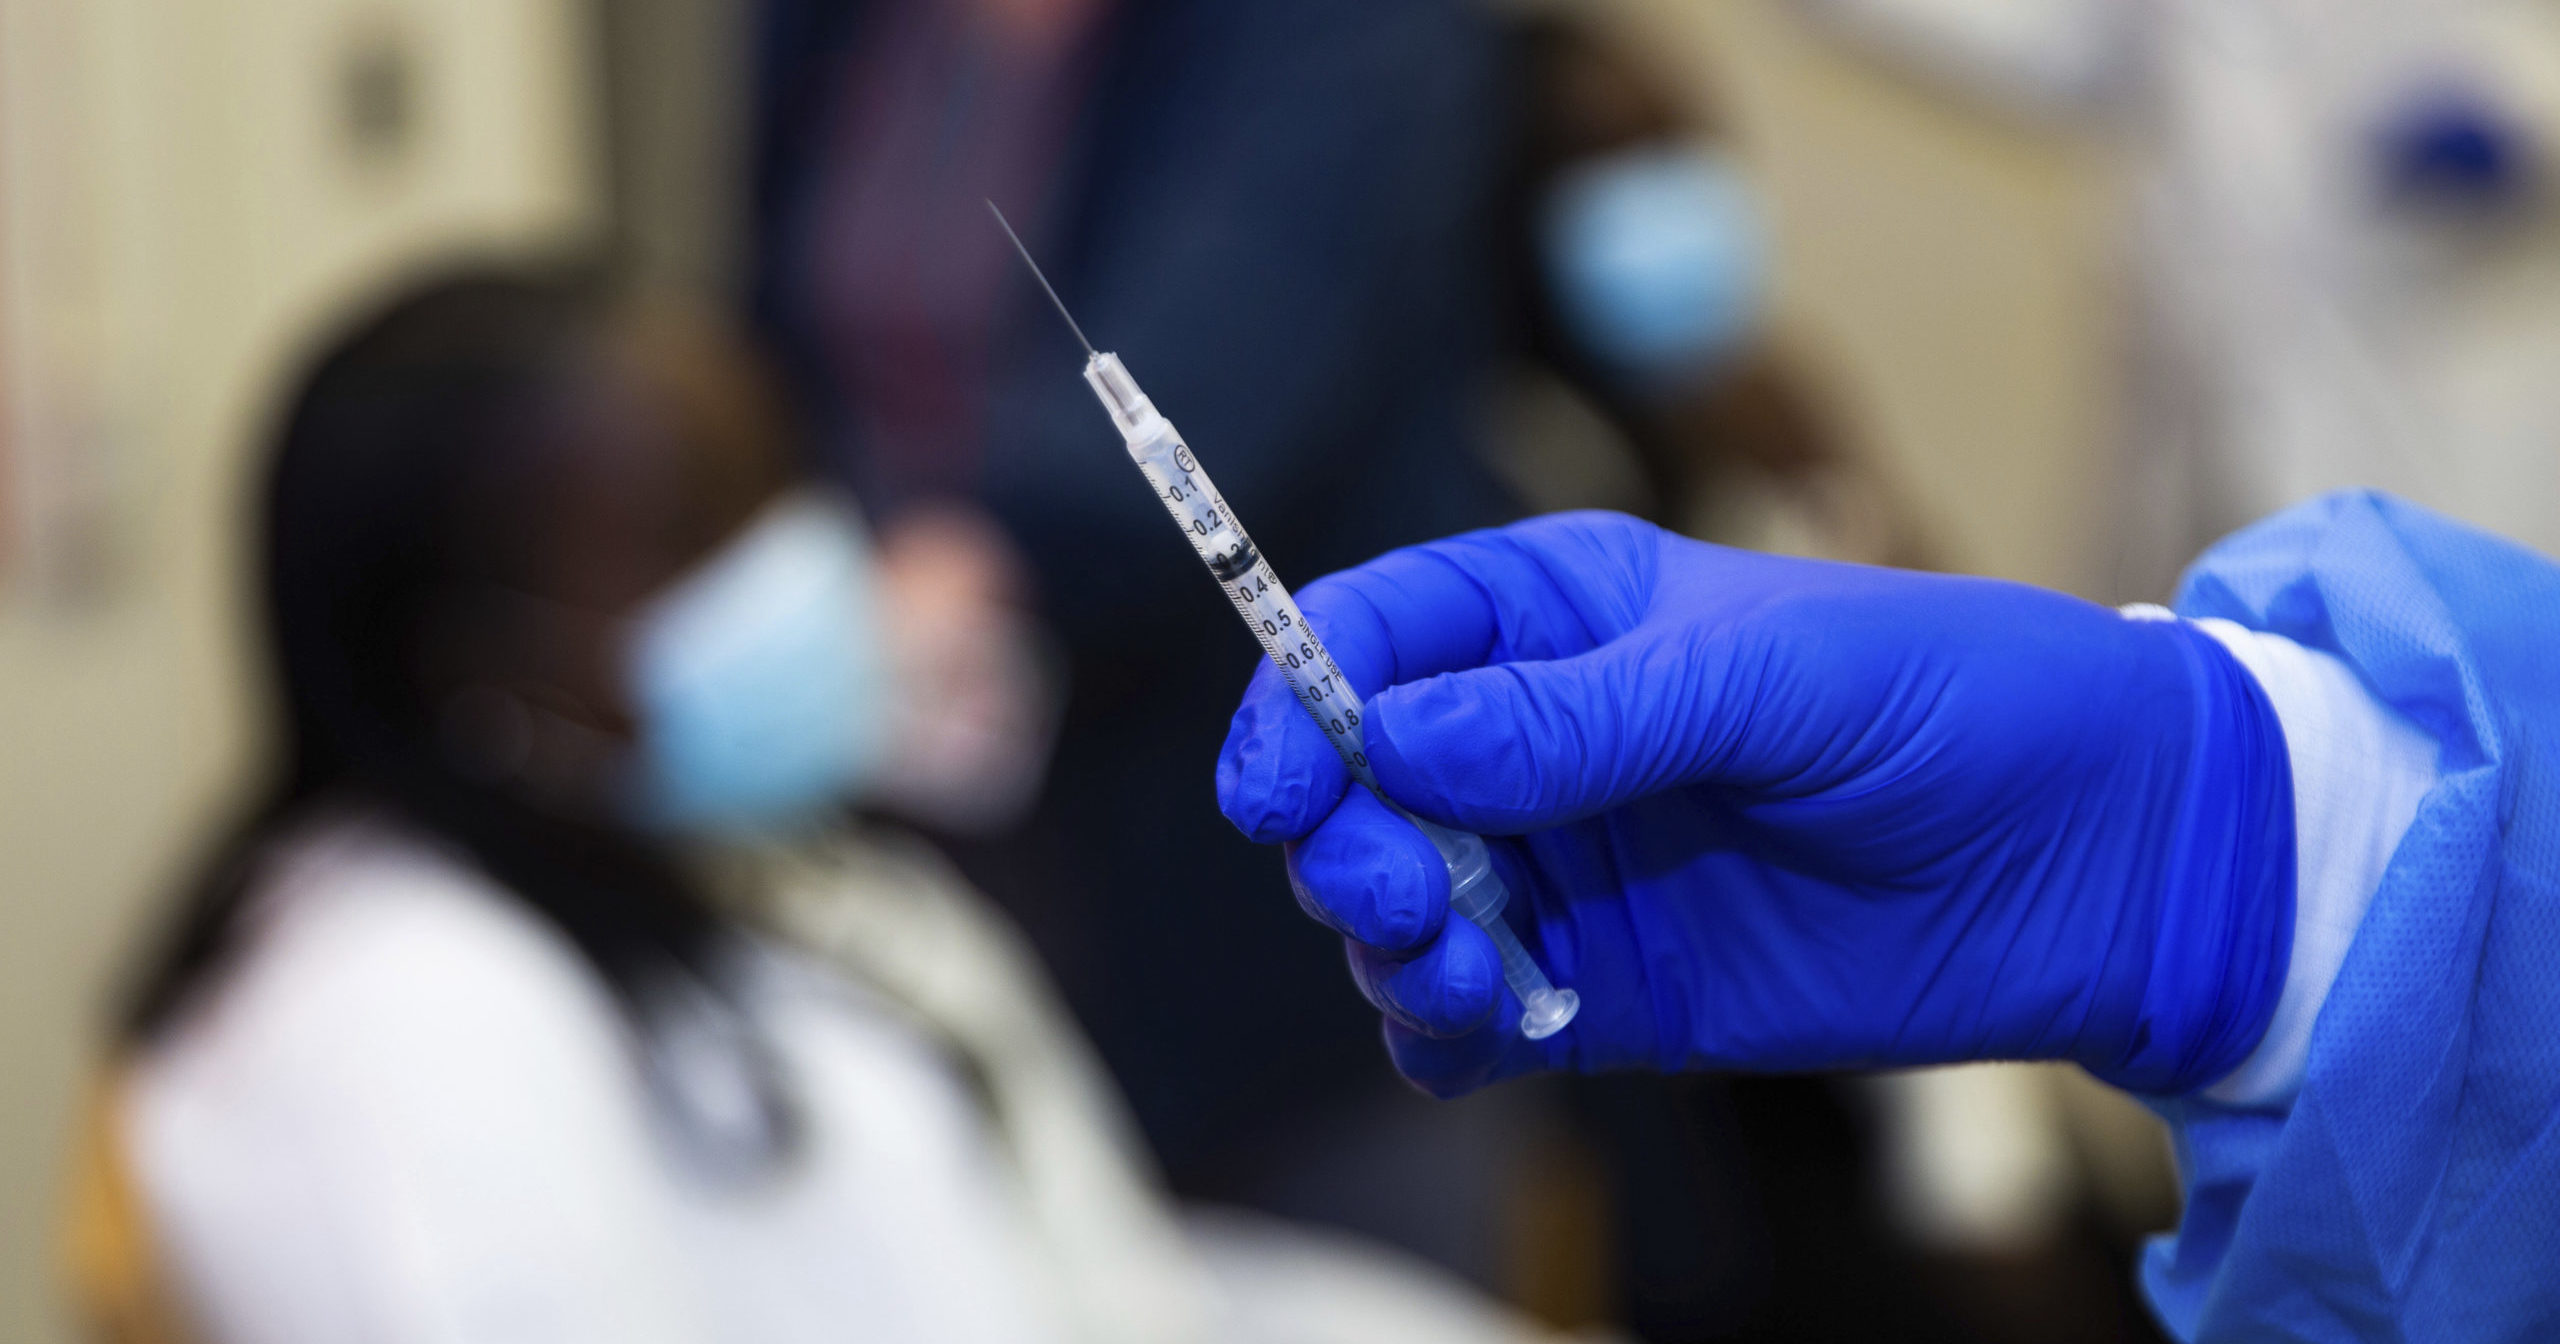 State and local governments are expected to receive their first round of federal money to support vaccination efforts in January 2021, providing a potential boost to an effort that has gone slower than expected in some states.